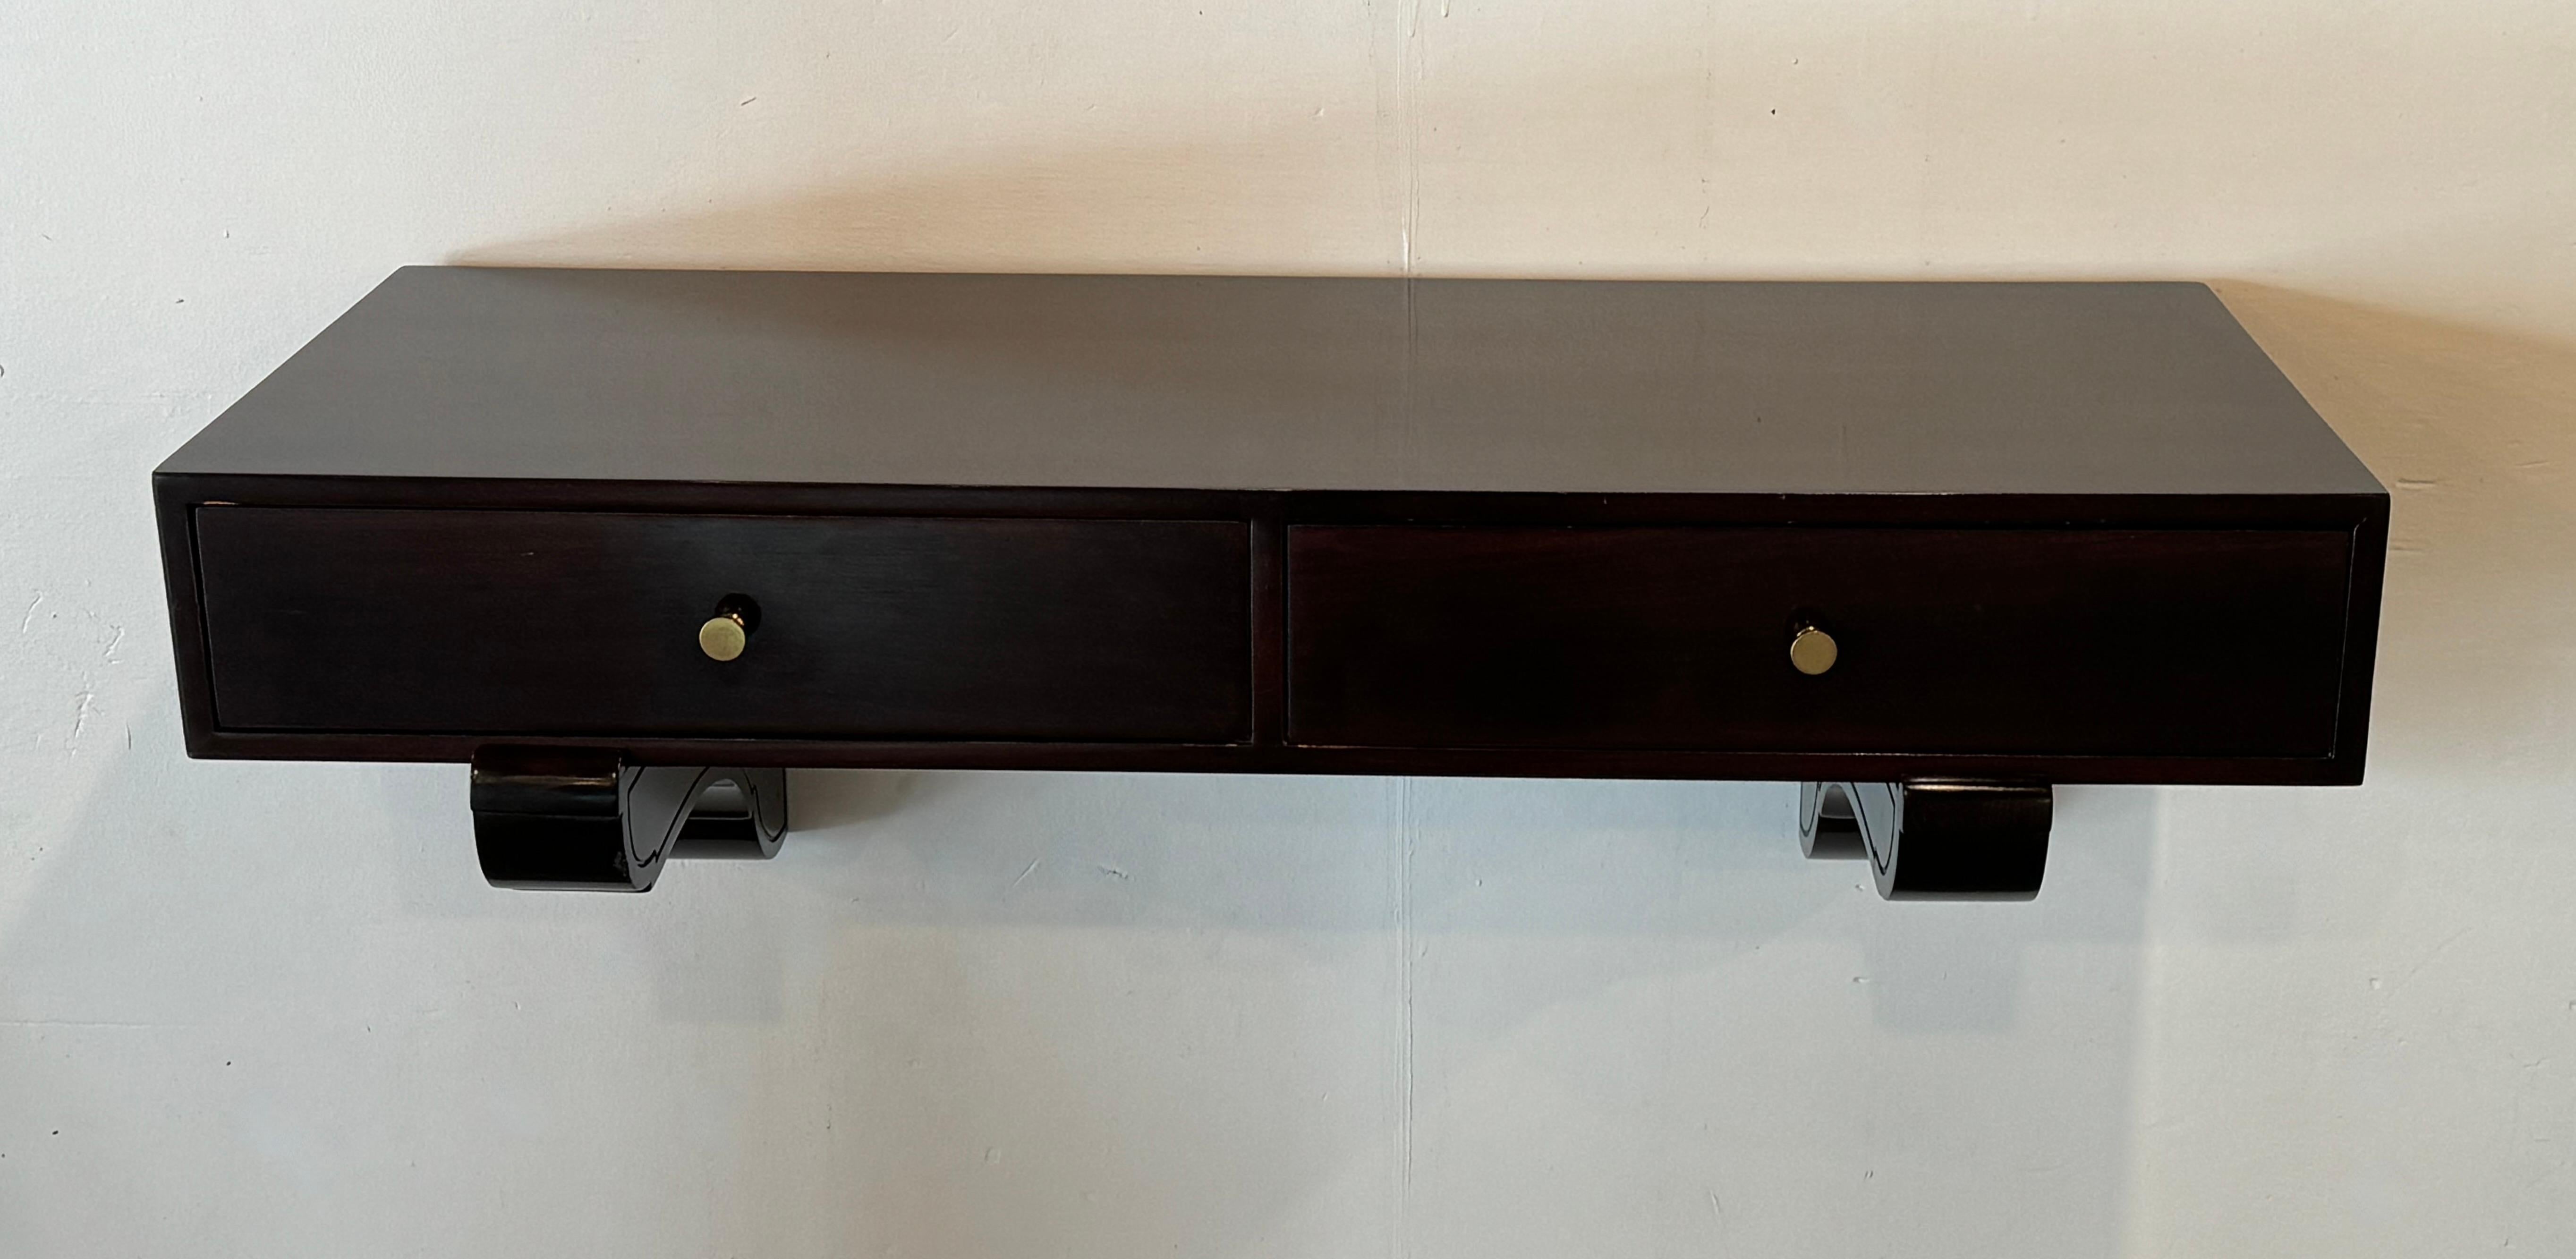 Hanging cabinet attributed to Milo Baughman for Directional furniture, Crafted out of Philippine Mahogany with a dark rosewood finish. The cabinet has two drawers with brass pulls and rests on two stylized wall mounts. An uncommon design by this